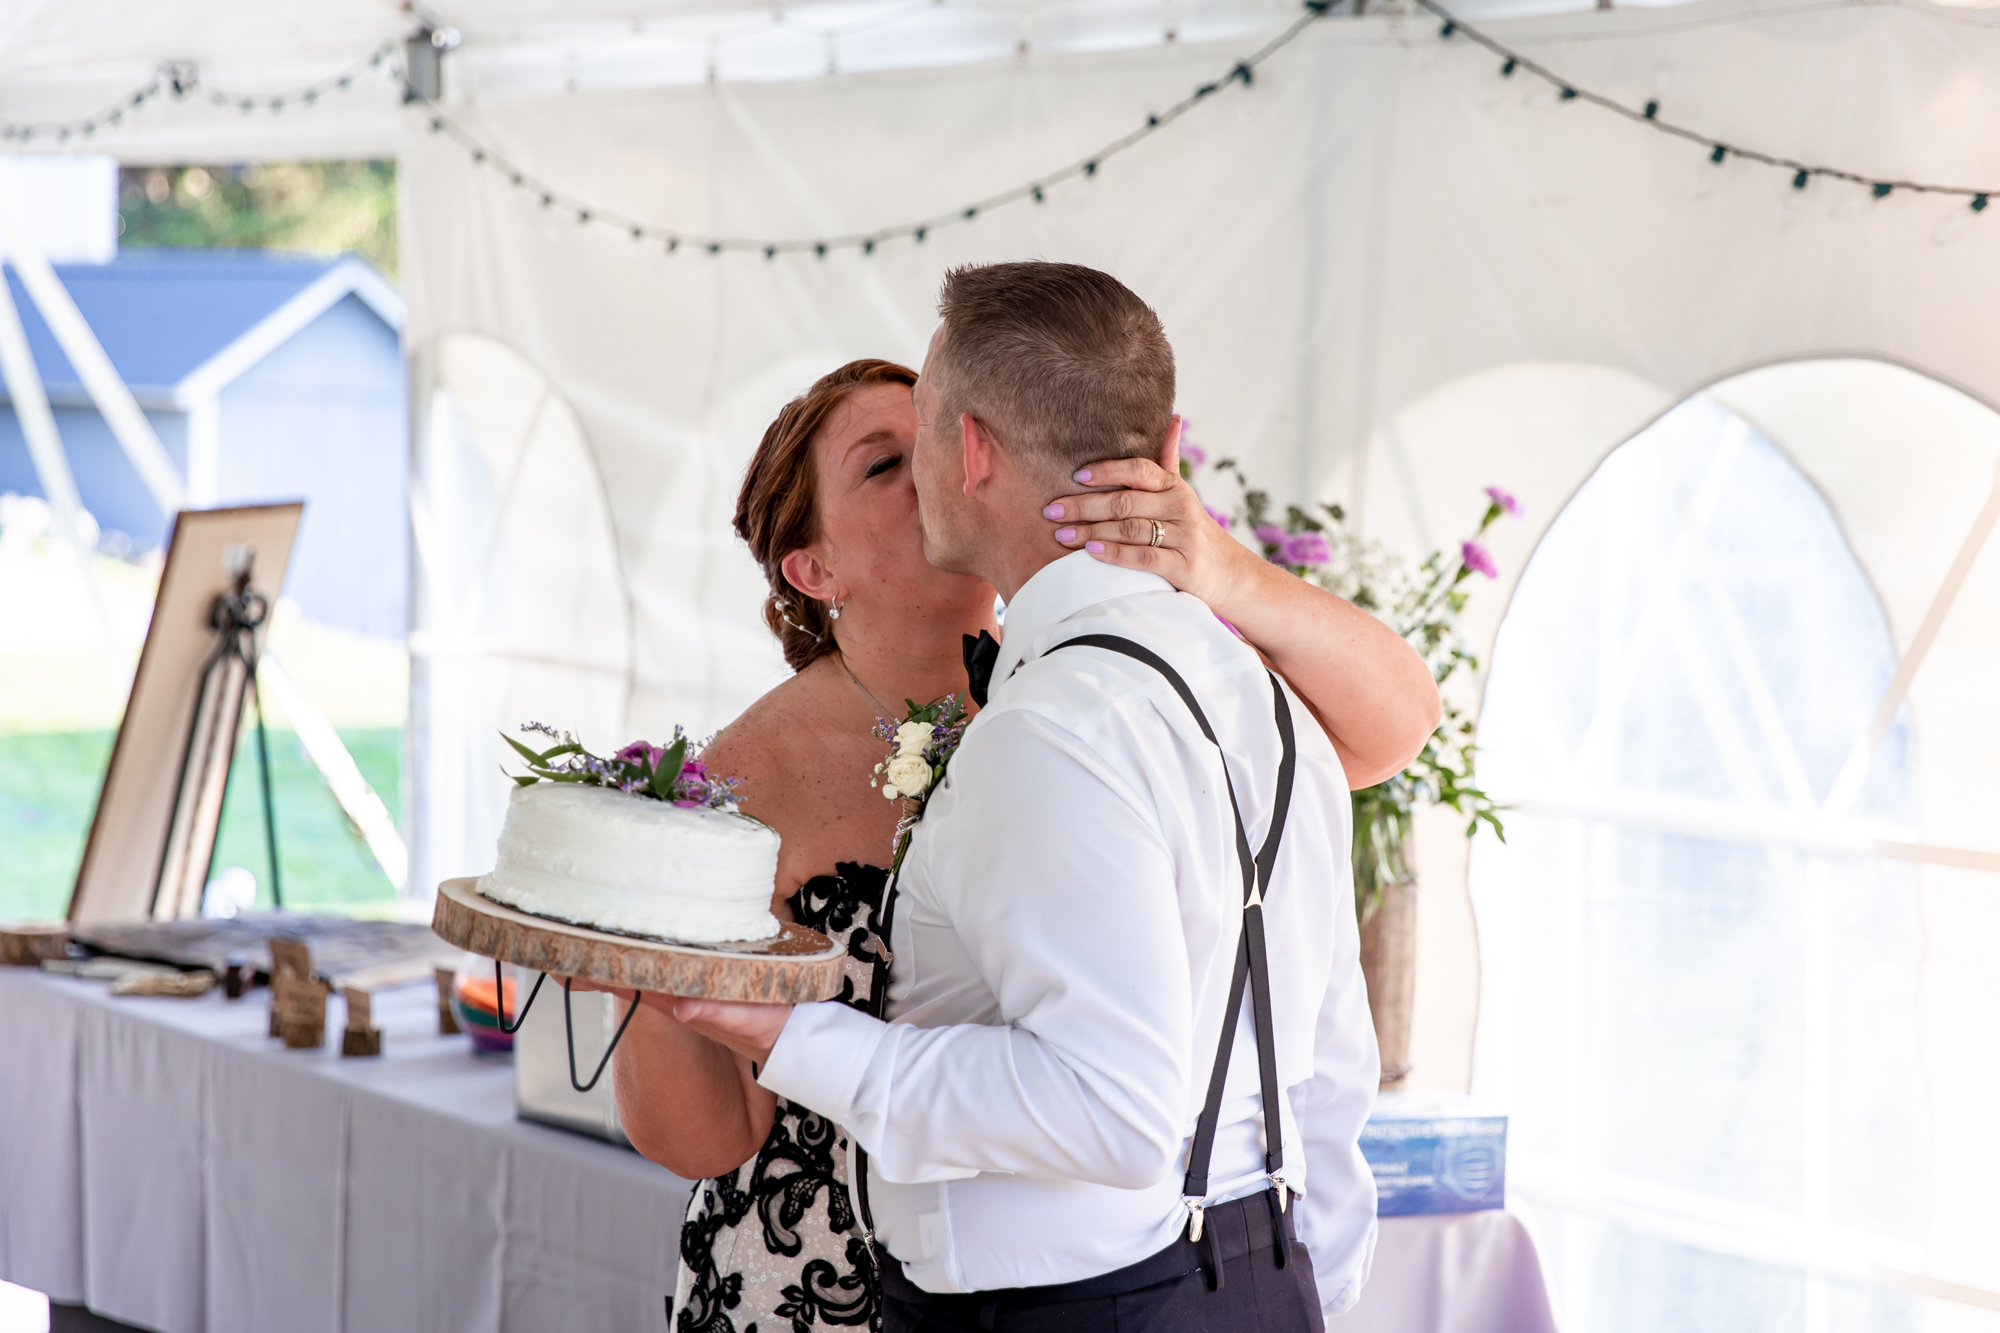 cake cutting at an outdoor tent reception